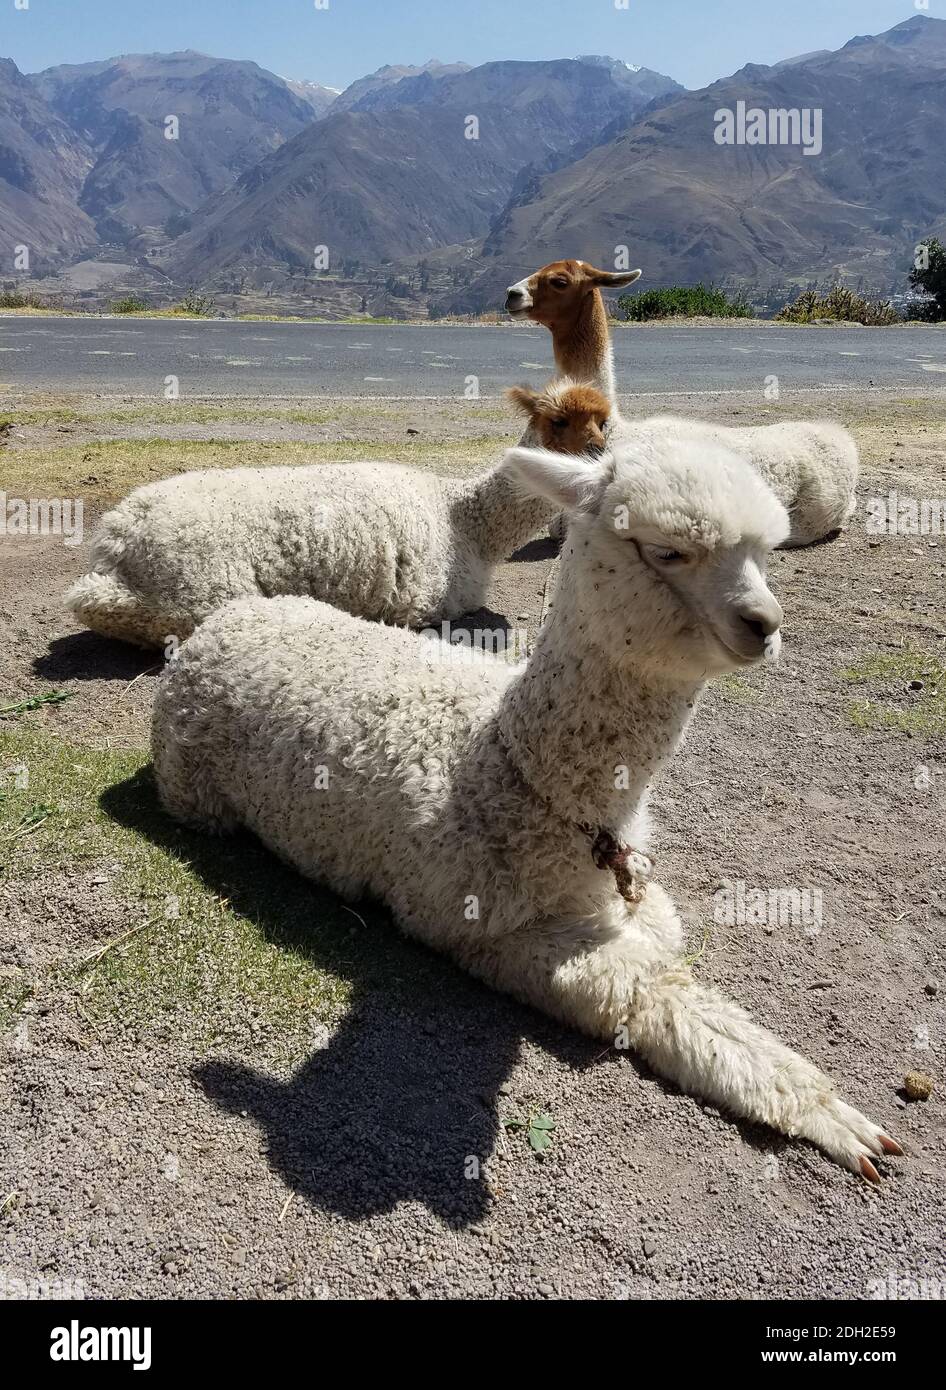 Alpaca close-up in Peru. Lamas and alpacas are the two domestic animals from the camel family in South America. Stock Photo